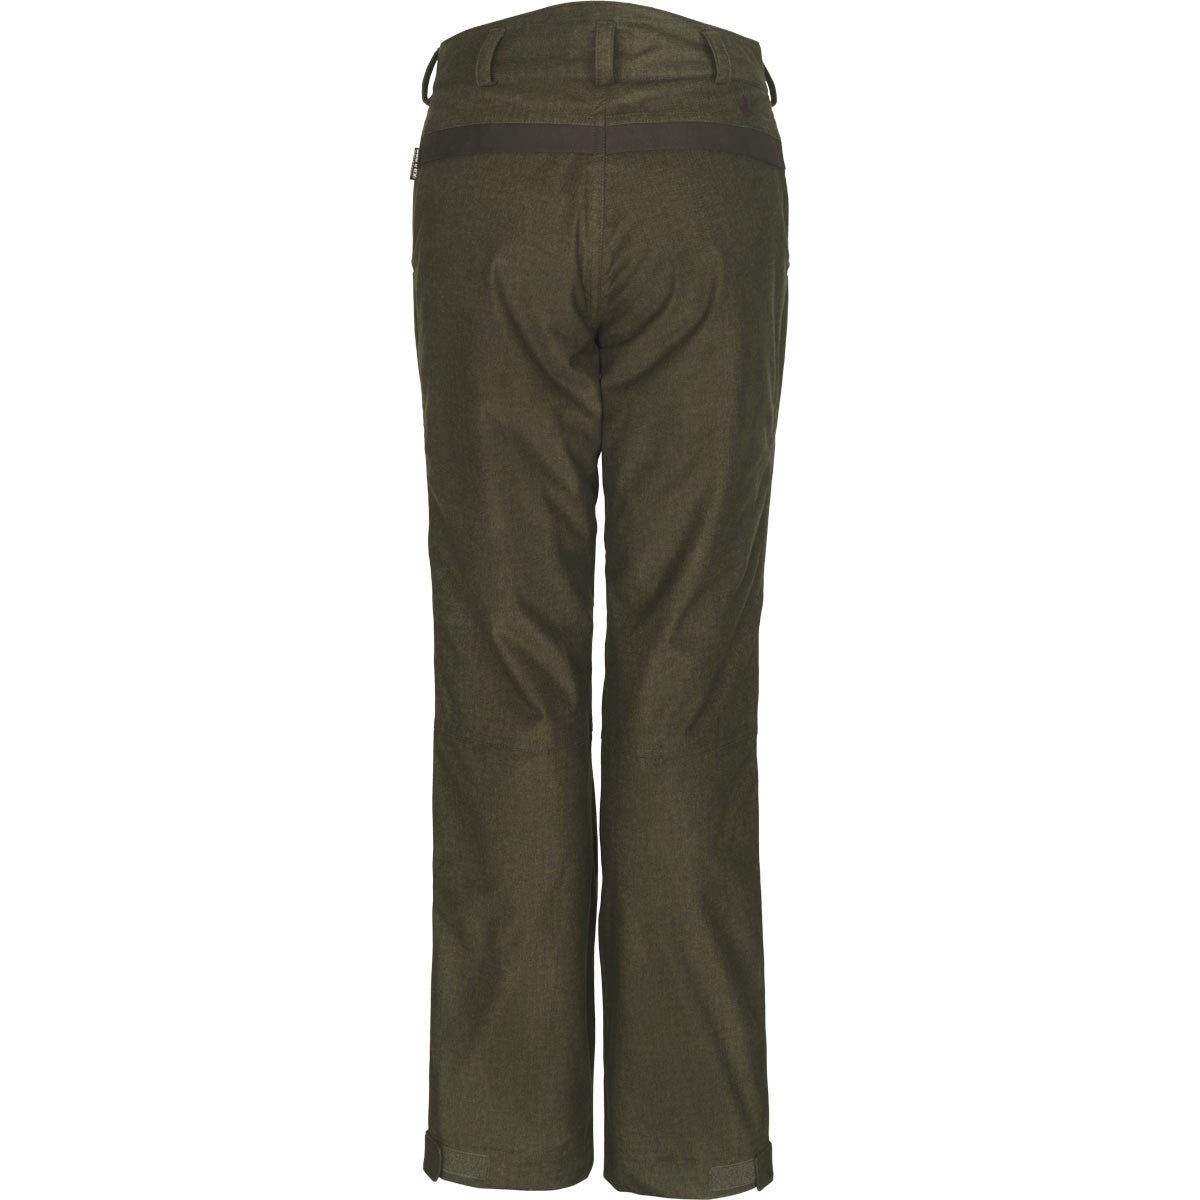 Seeland North Ladies Trousers - Pine Green (Size UK 14)